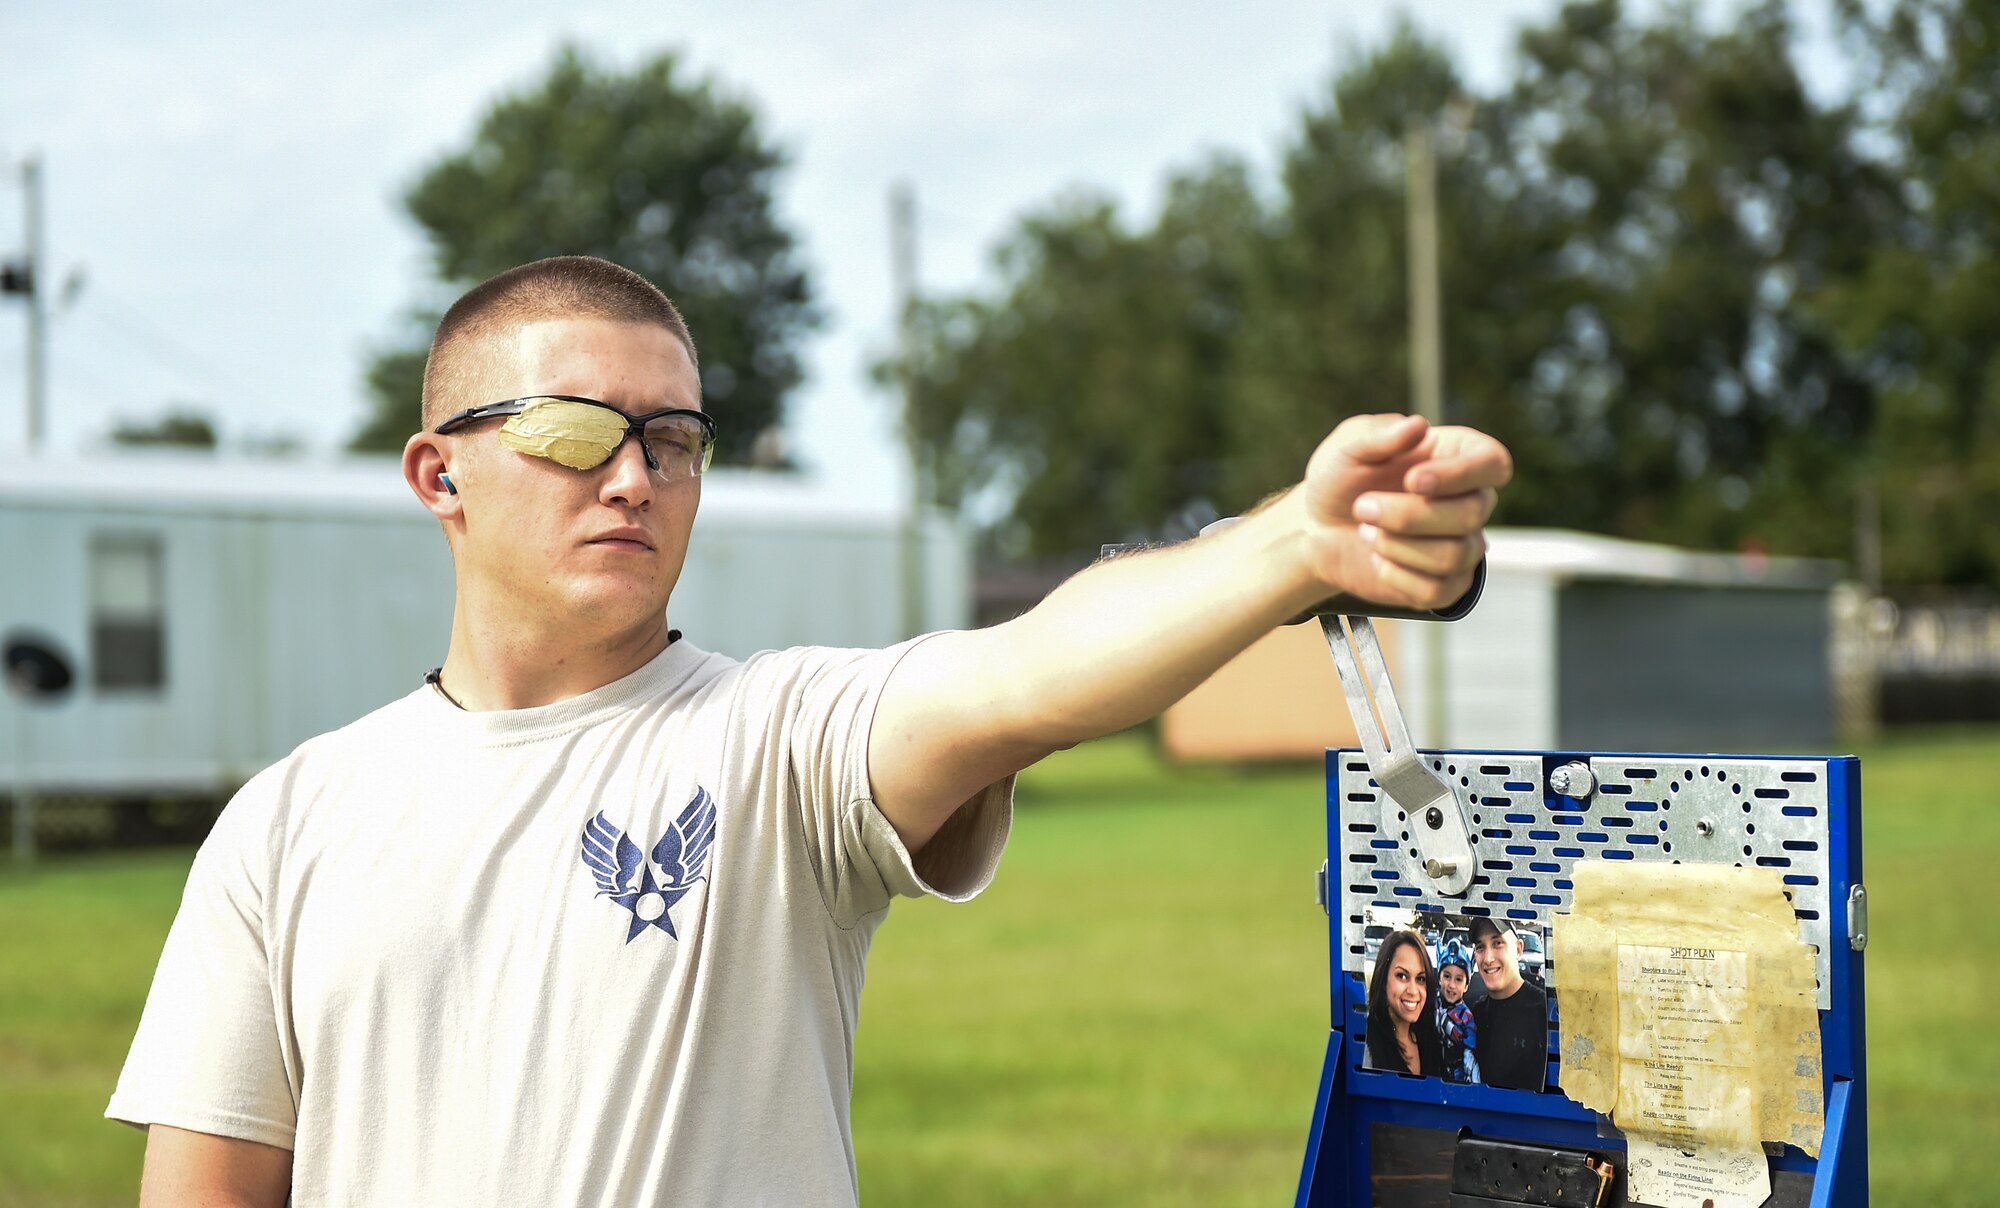 U.S. Air Force Staff Sgt. Jeremiah Jackson, 23d Equipment Maintenance Squadron aircraft metal technology craftsman and member of the Air Force National Pistol Team, visualizes the target during pistol shooting practice Sept. 4, 2015, in Valdosta, Ga. Jackson practices visualizing his shots to mentally prepare for every competition. (U.S. Air Force photo by Senior Airman Ceaira Tinsley/Released)